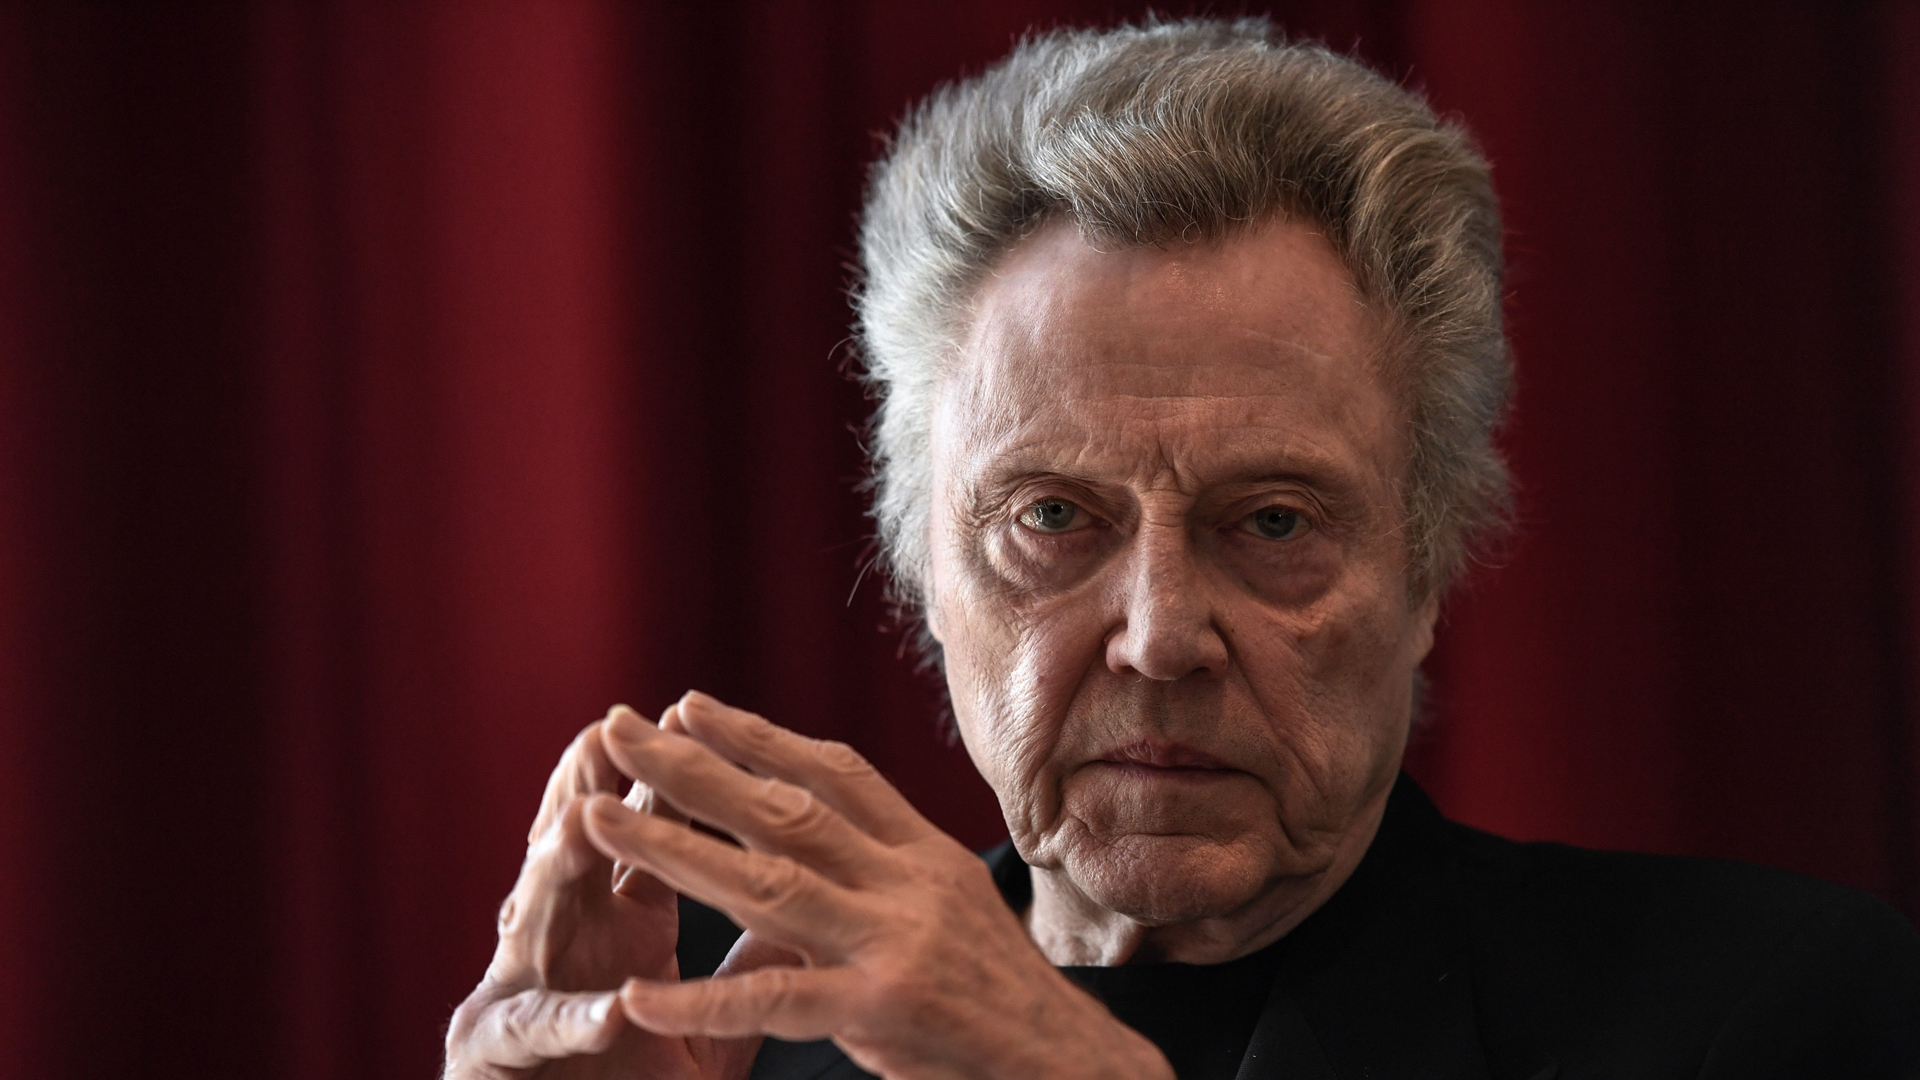 An official image of Christopher Walken staring at the camera with his fingers pressed against one another